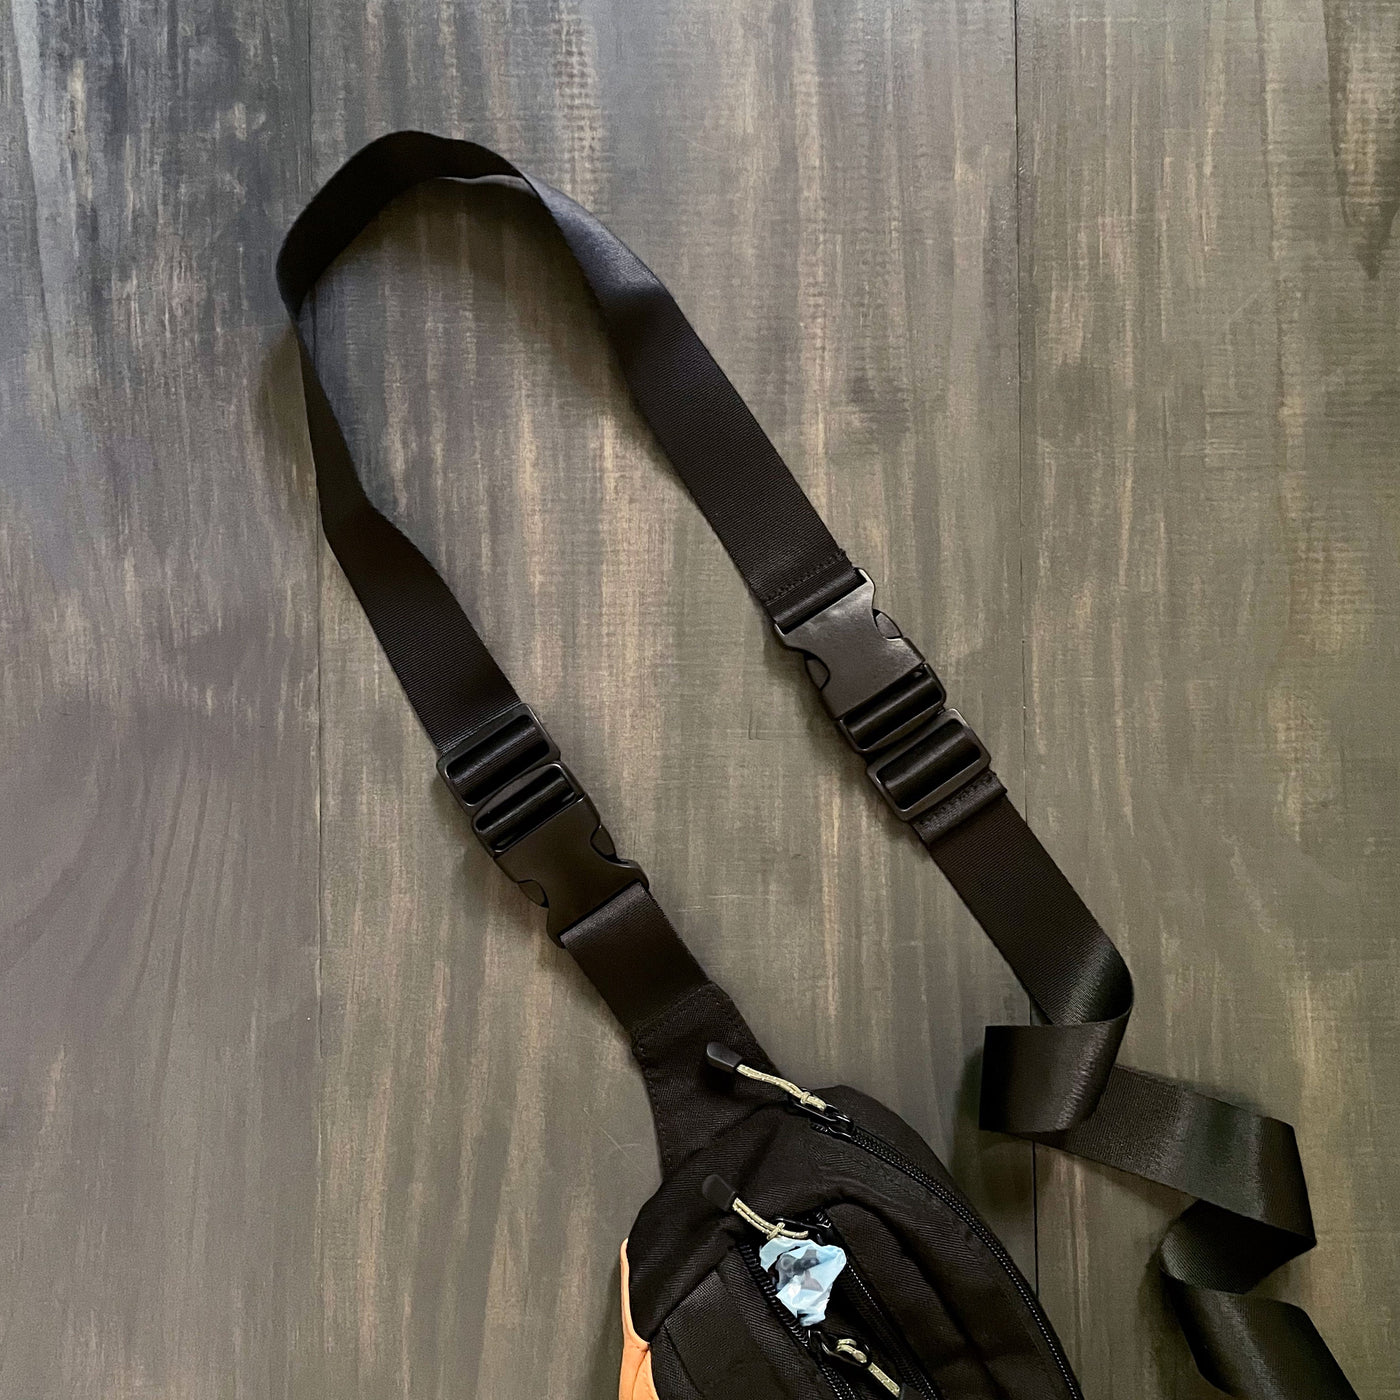 Rogue Gear Co The Extender Strap